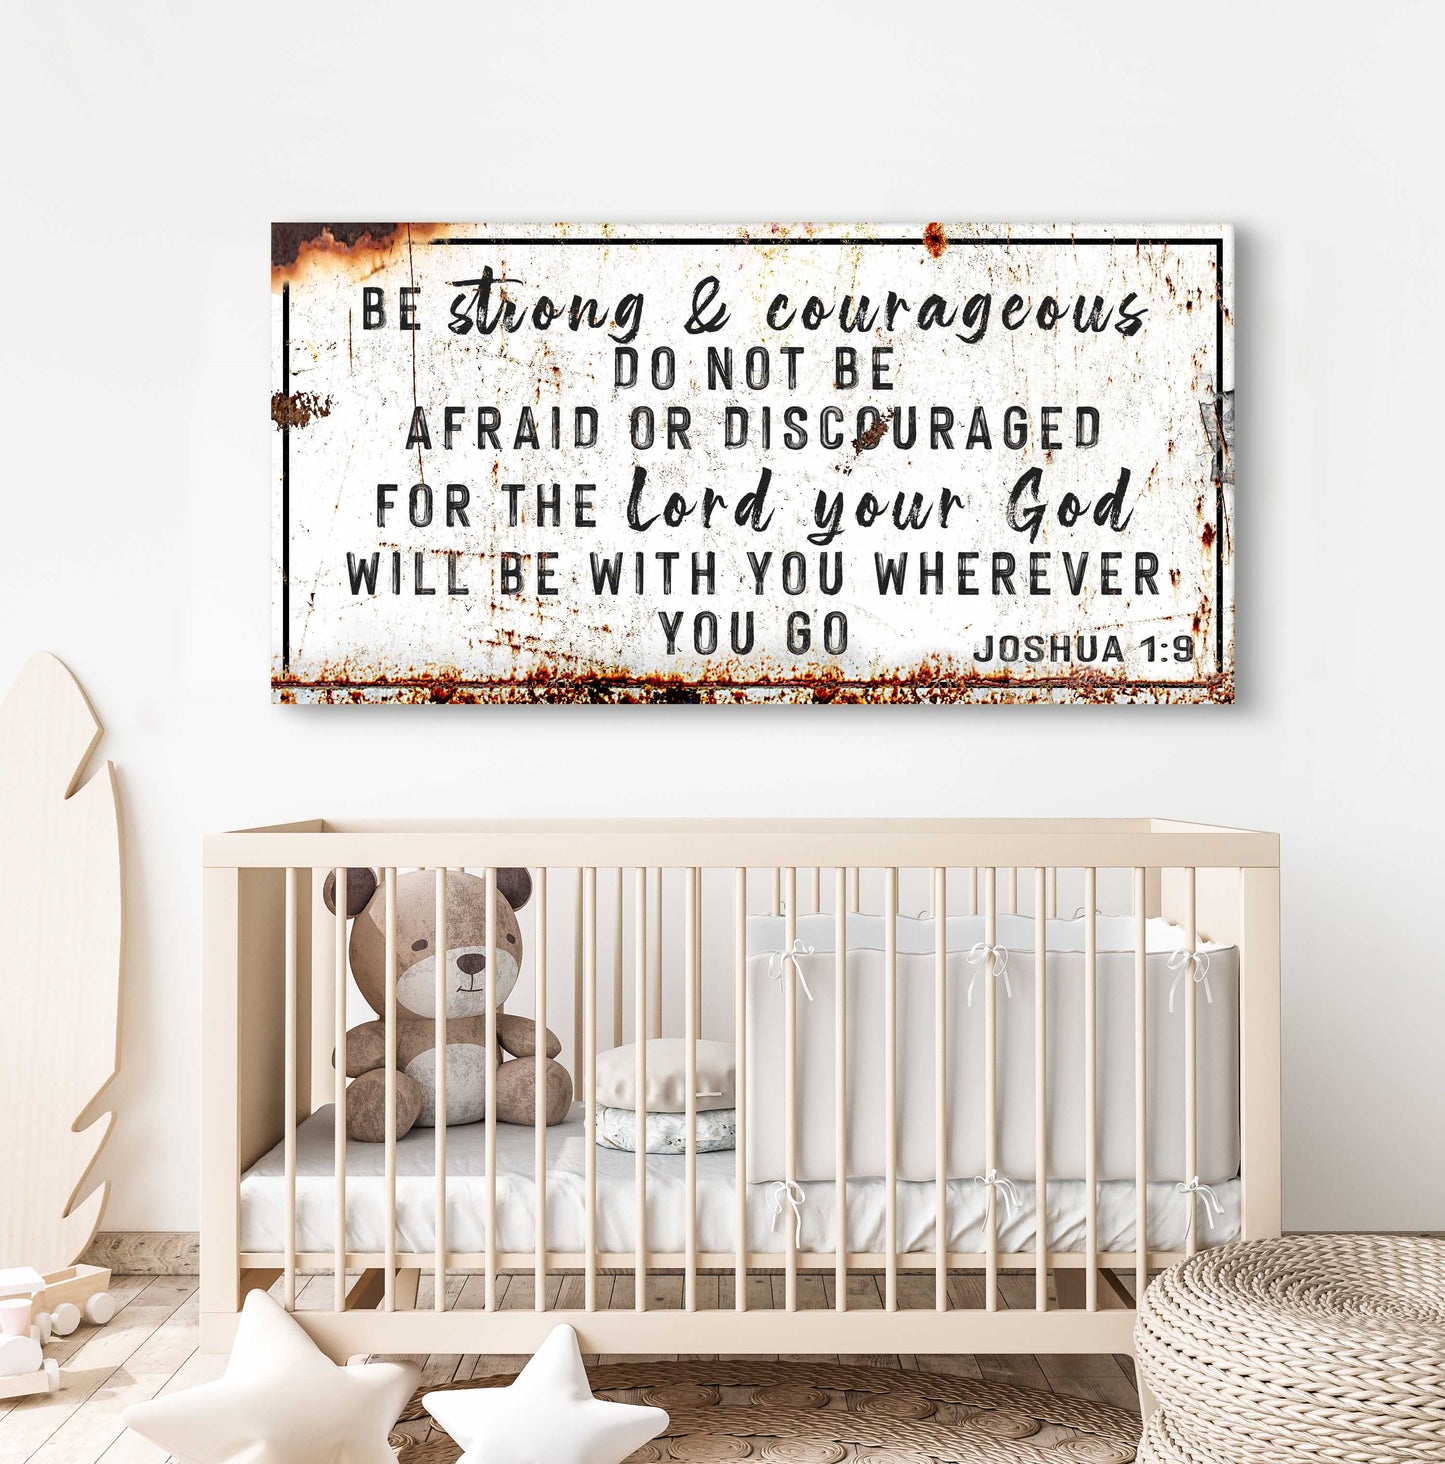 BE STRONG AND COURAGEOUS Sign - Image by Tailored Canvases